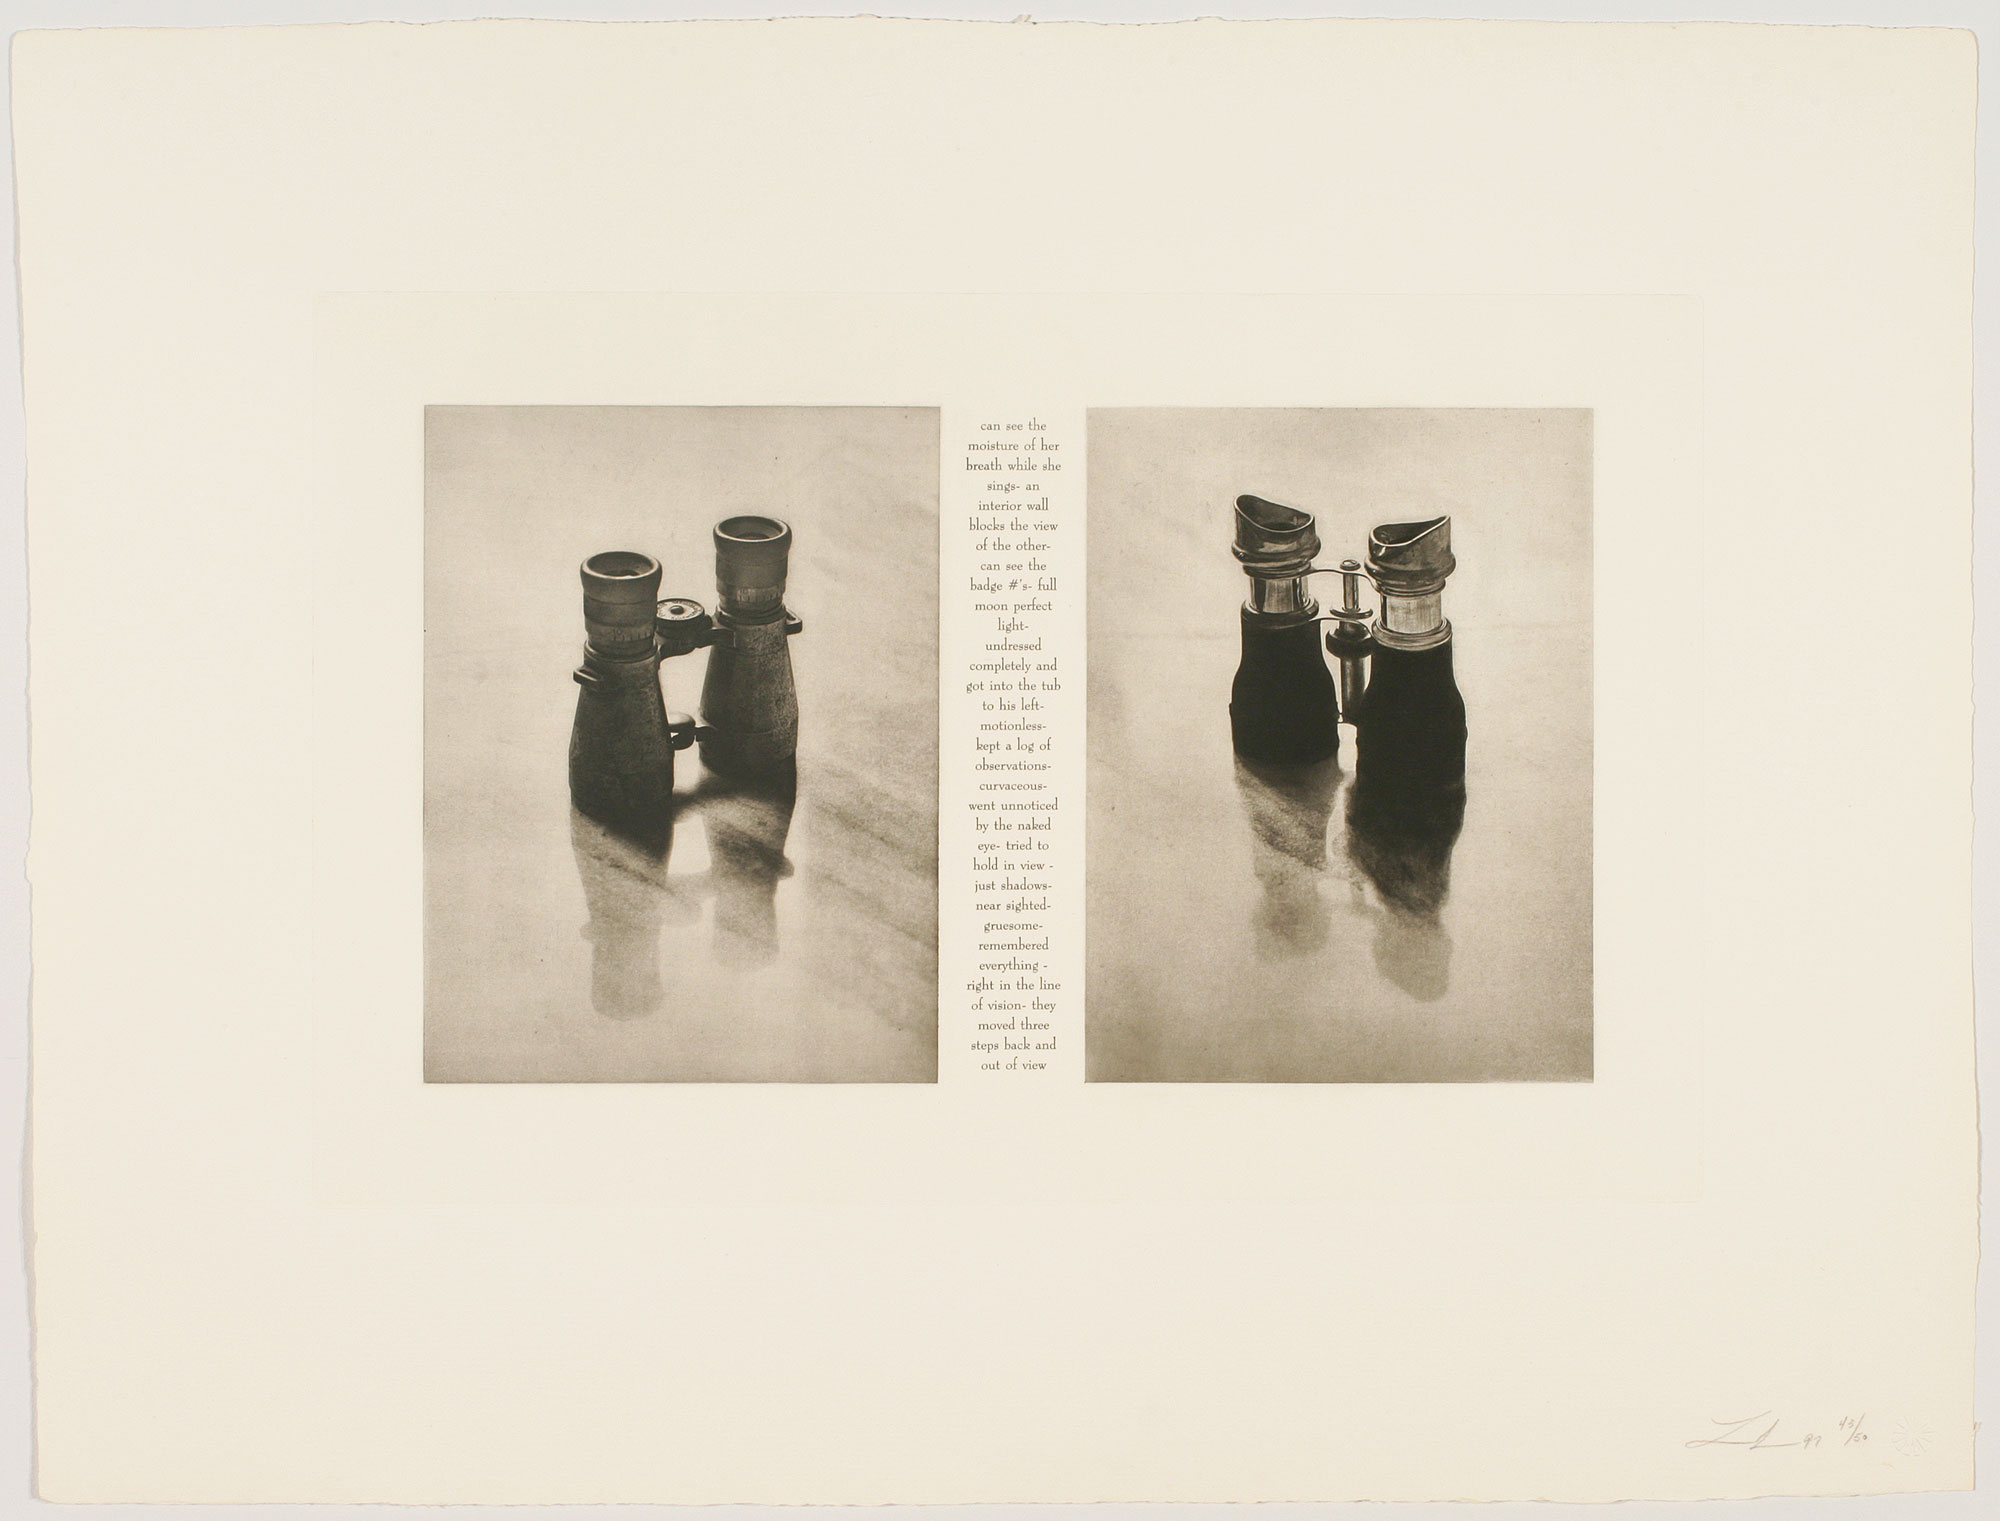 Lorna Simpson
Two Pairs, 1997
photogravure
20 x 26 in.
Published by Graphicstudio, University of South Florida Collection